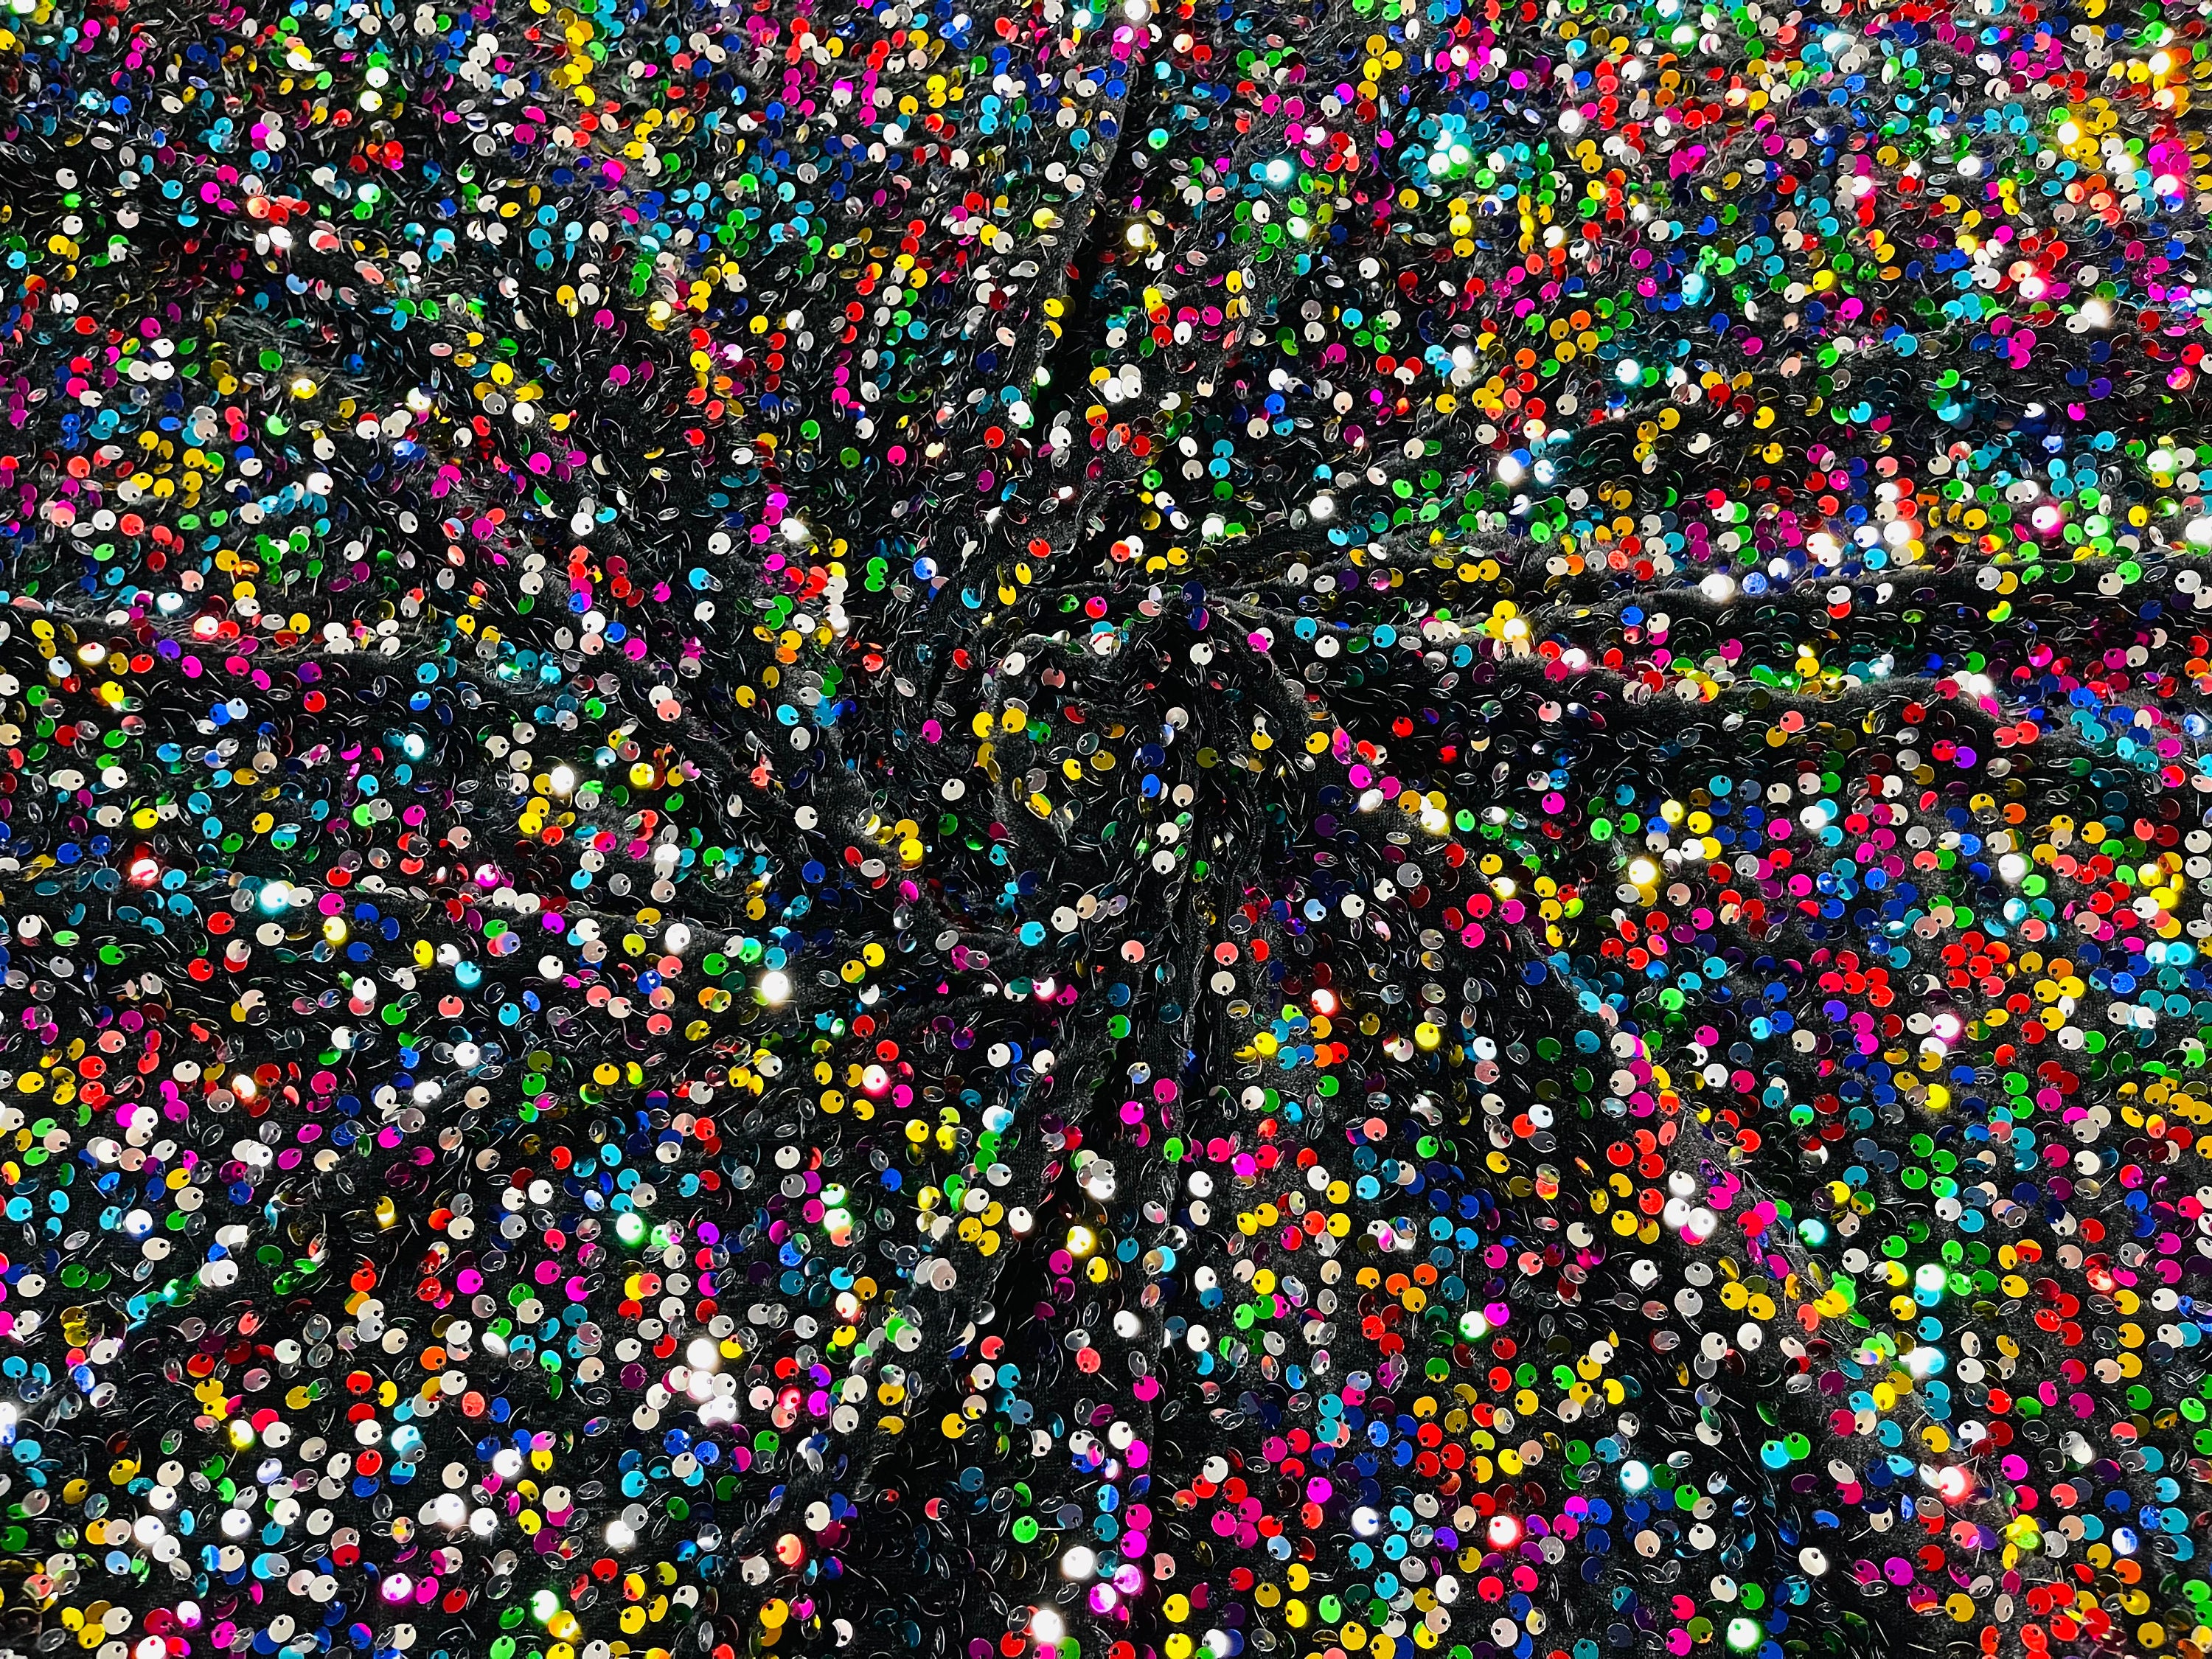 Rainbow Sequin on Black Stretch Velvet With Partial Luxury Sequins 5mm  Shining Sequins 2-way Stretch 58/60 choose the Quantity 